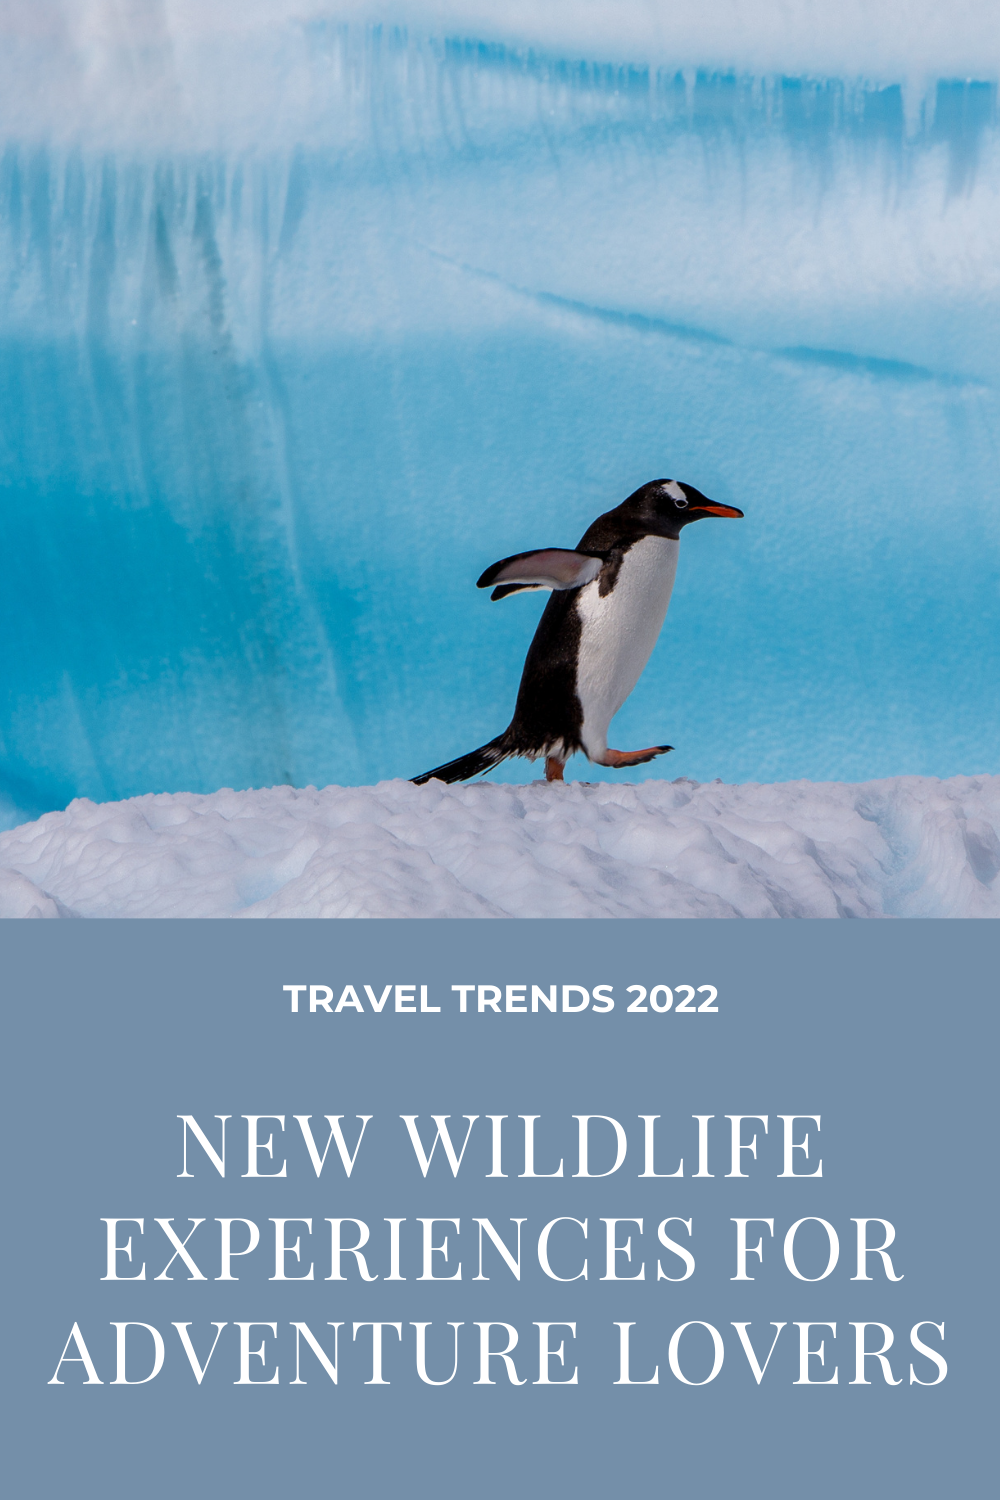 Travel Trends 2022 New Wildlife Experiences for Adventure Lovers